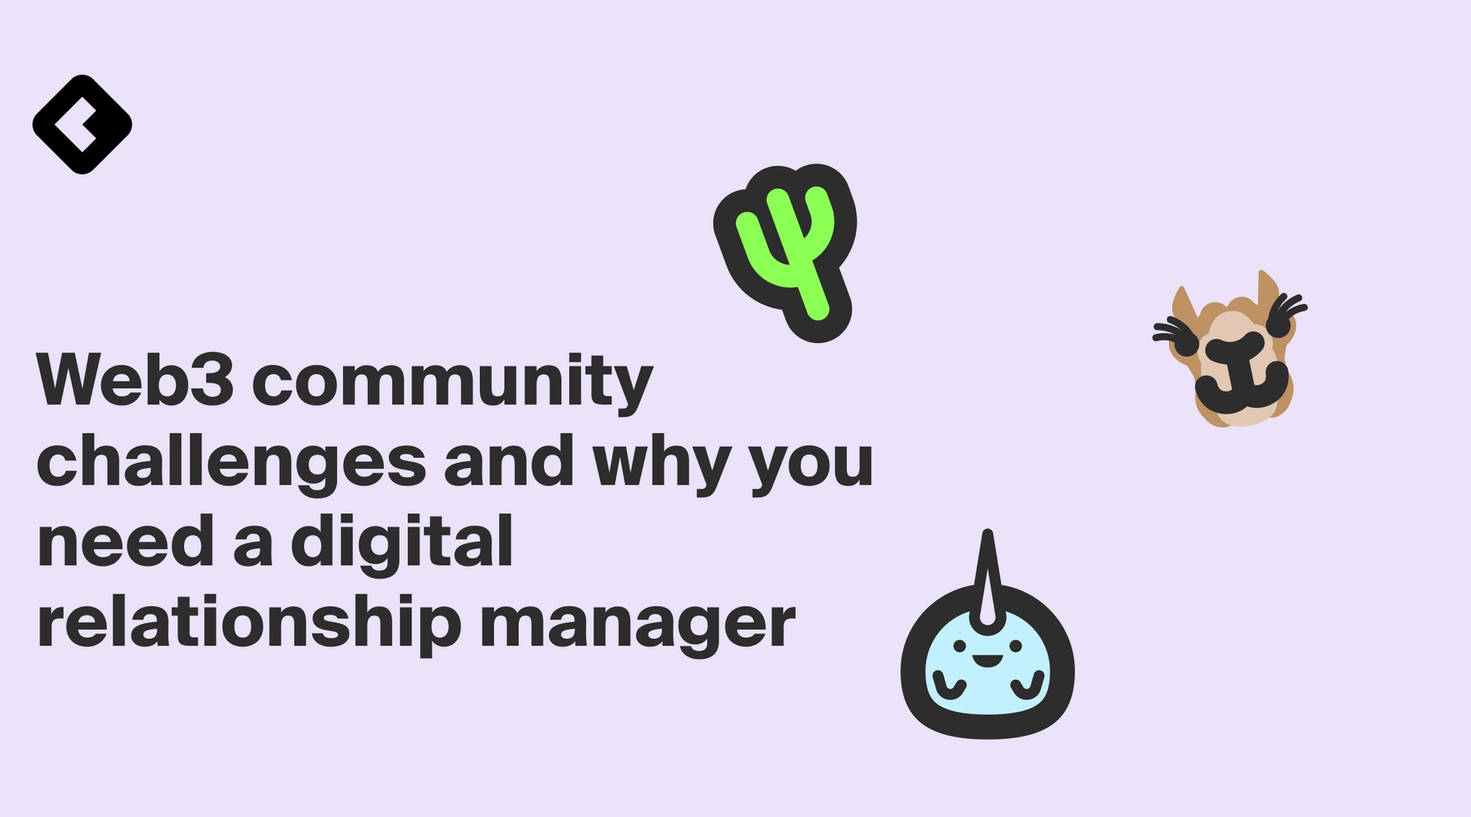 Web3 community challenges and why you need a digital relationship manager